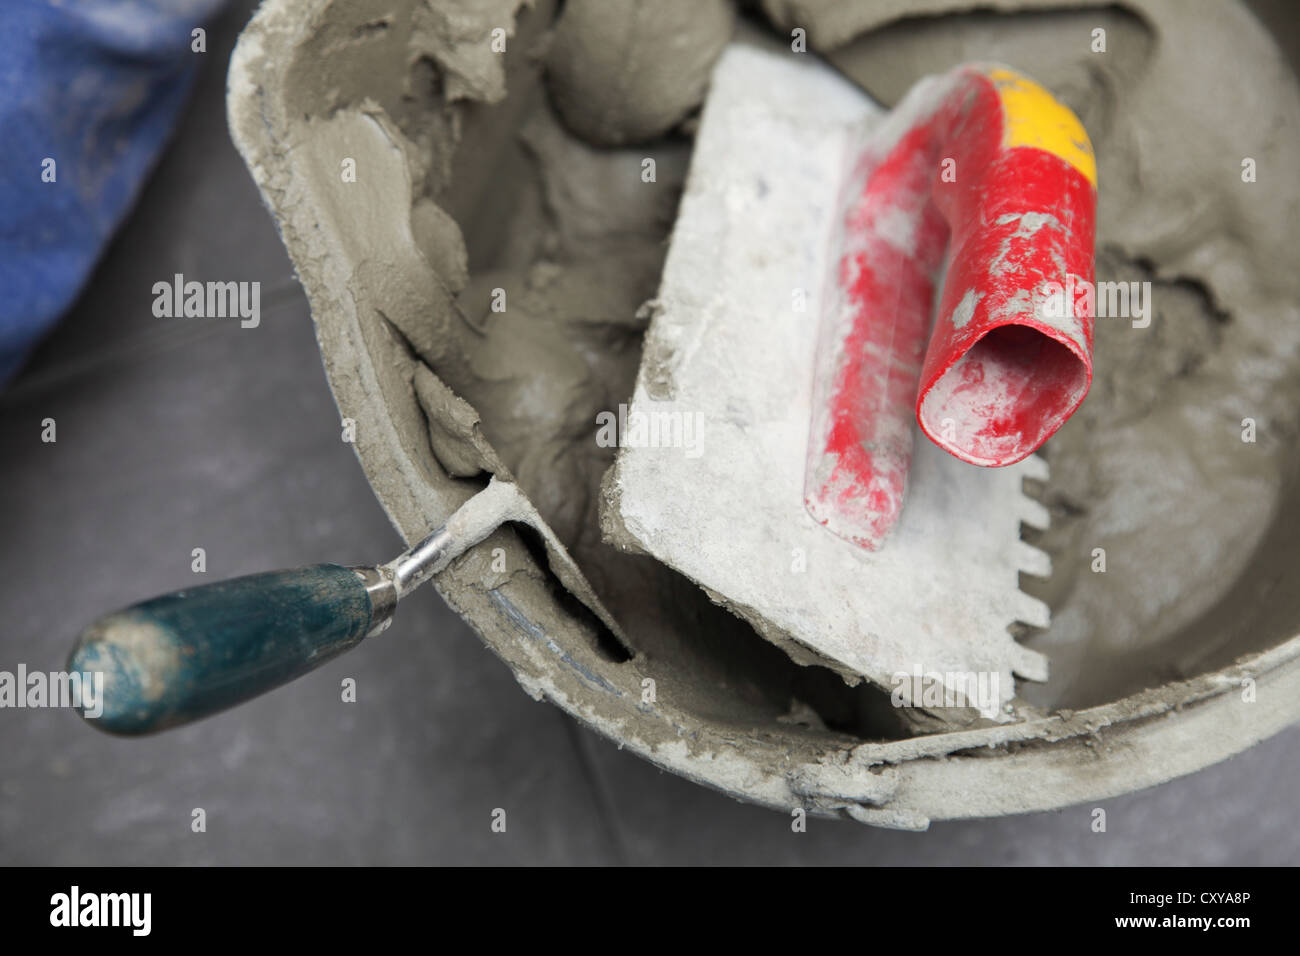 mortar on wall construction notched trowel work tools Stock Photo